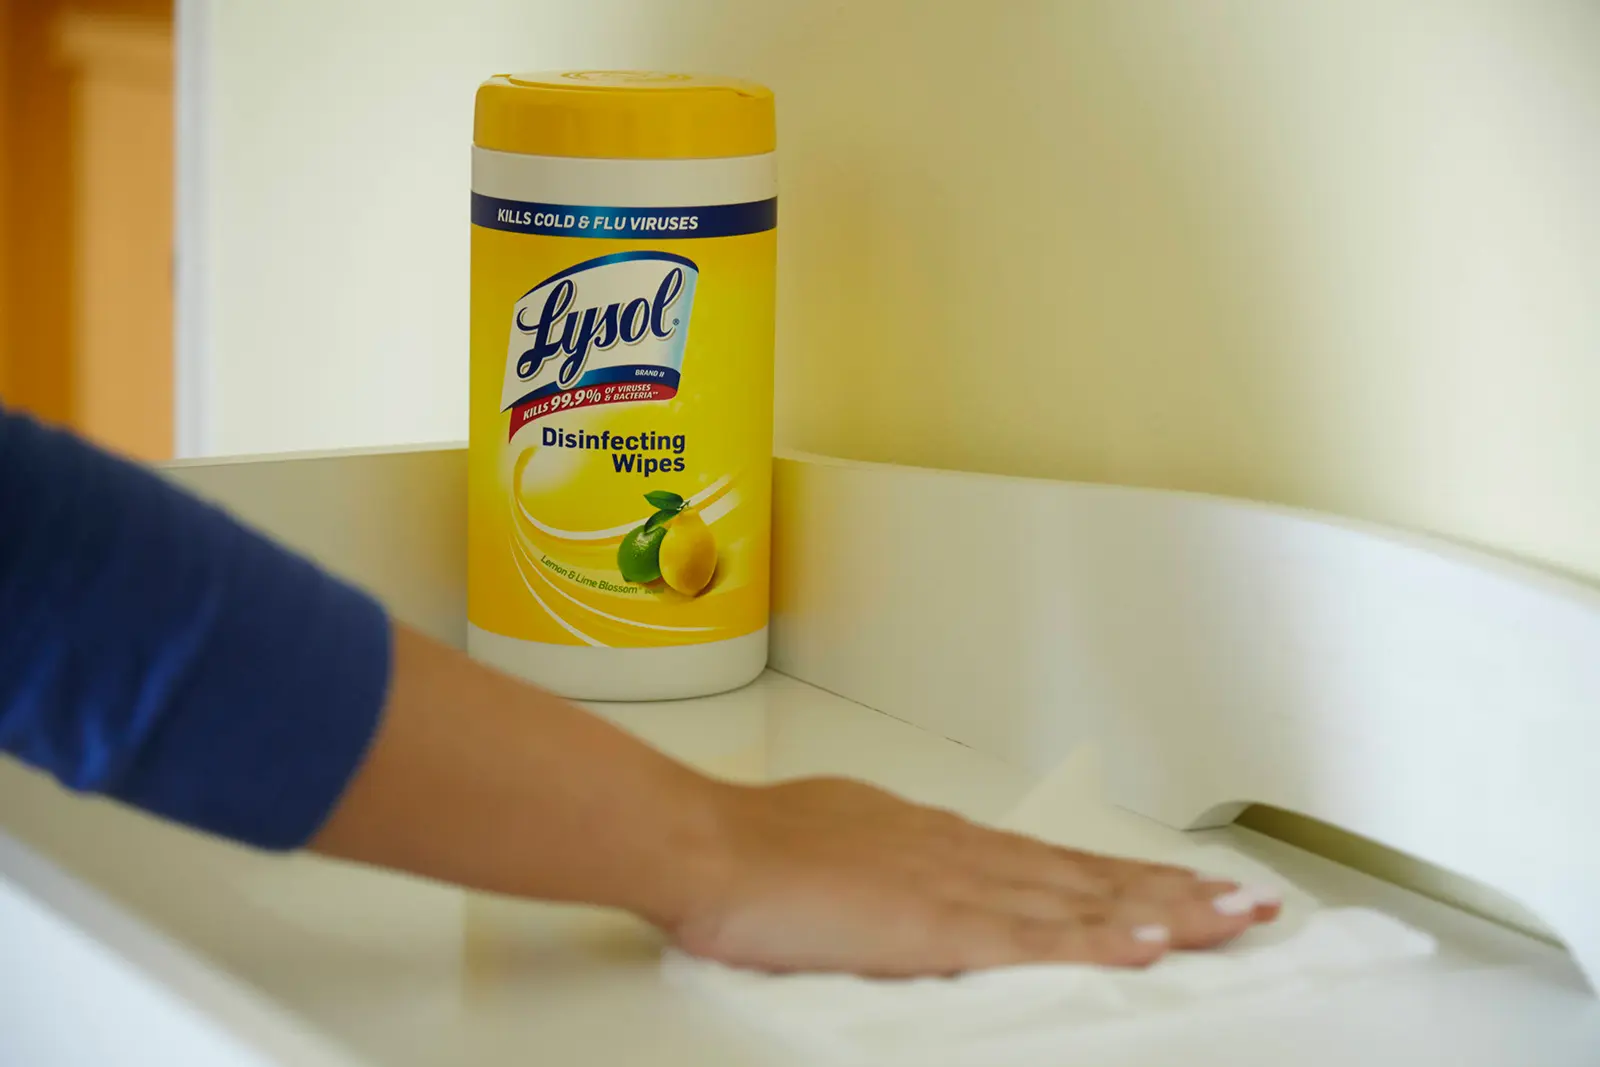 Arm wiping down white surface next to canister of Lysol Disinfecting Wipes